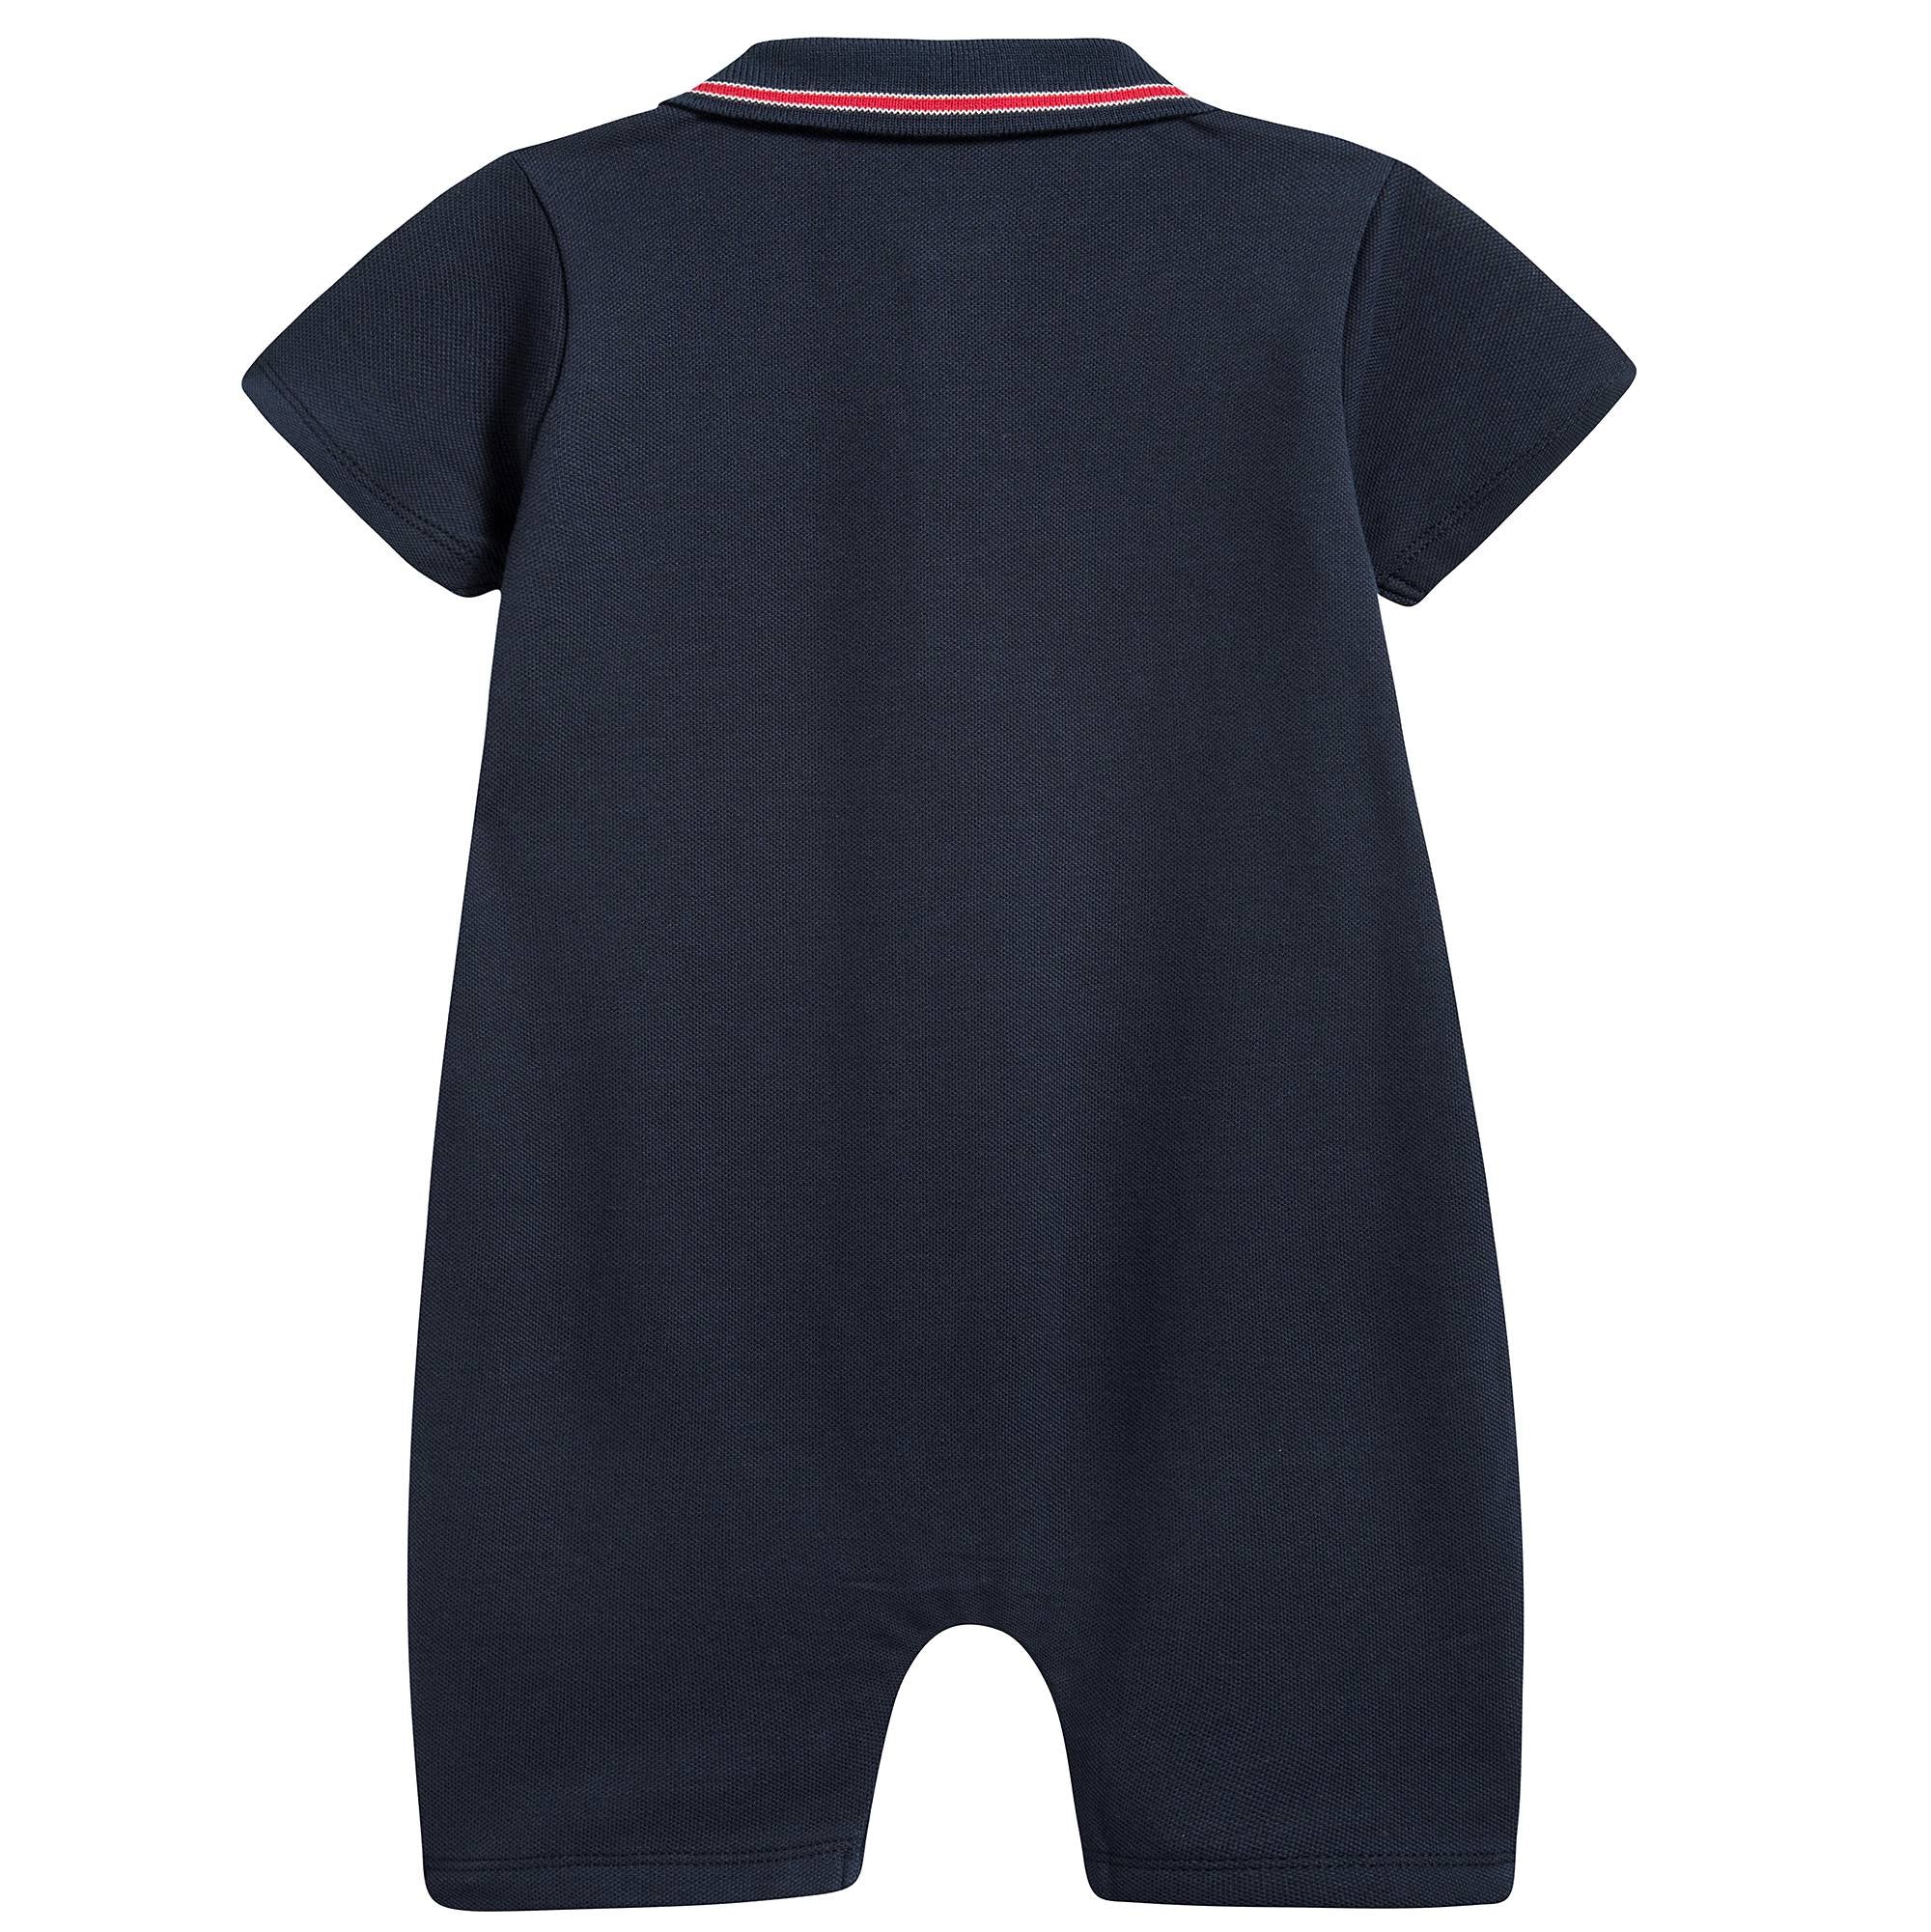 Baby Boys Navy Blue "Pagliaccetto" Babysuit